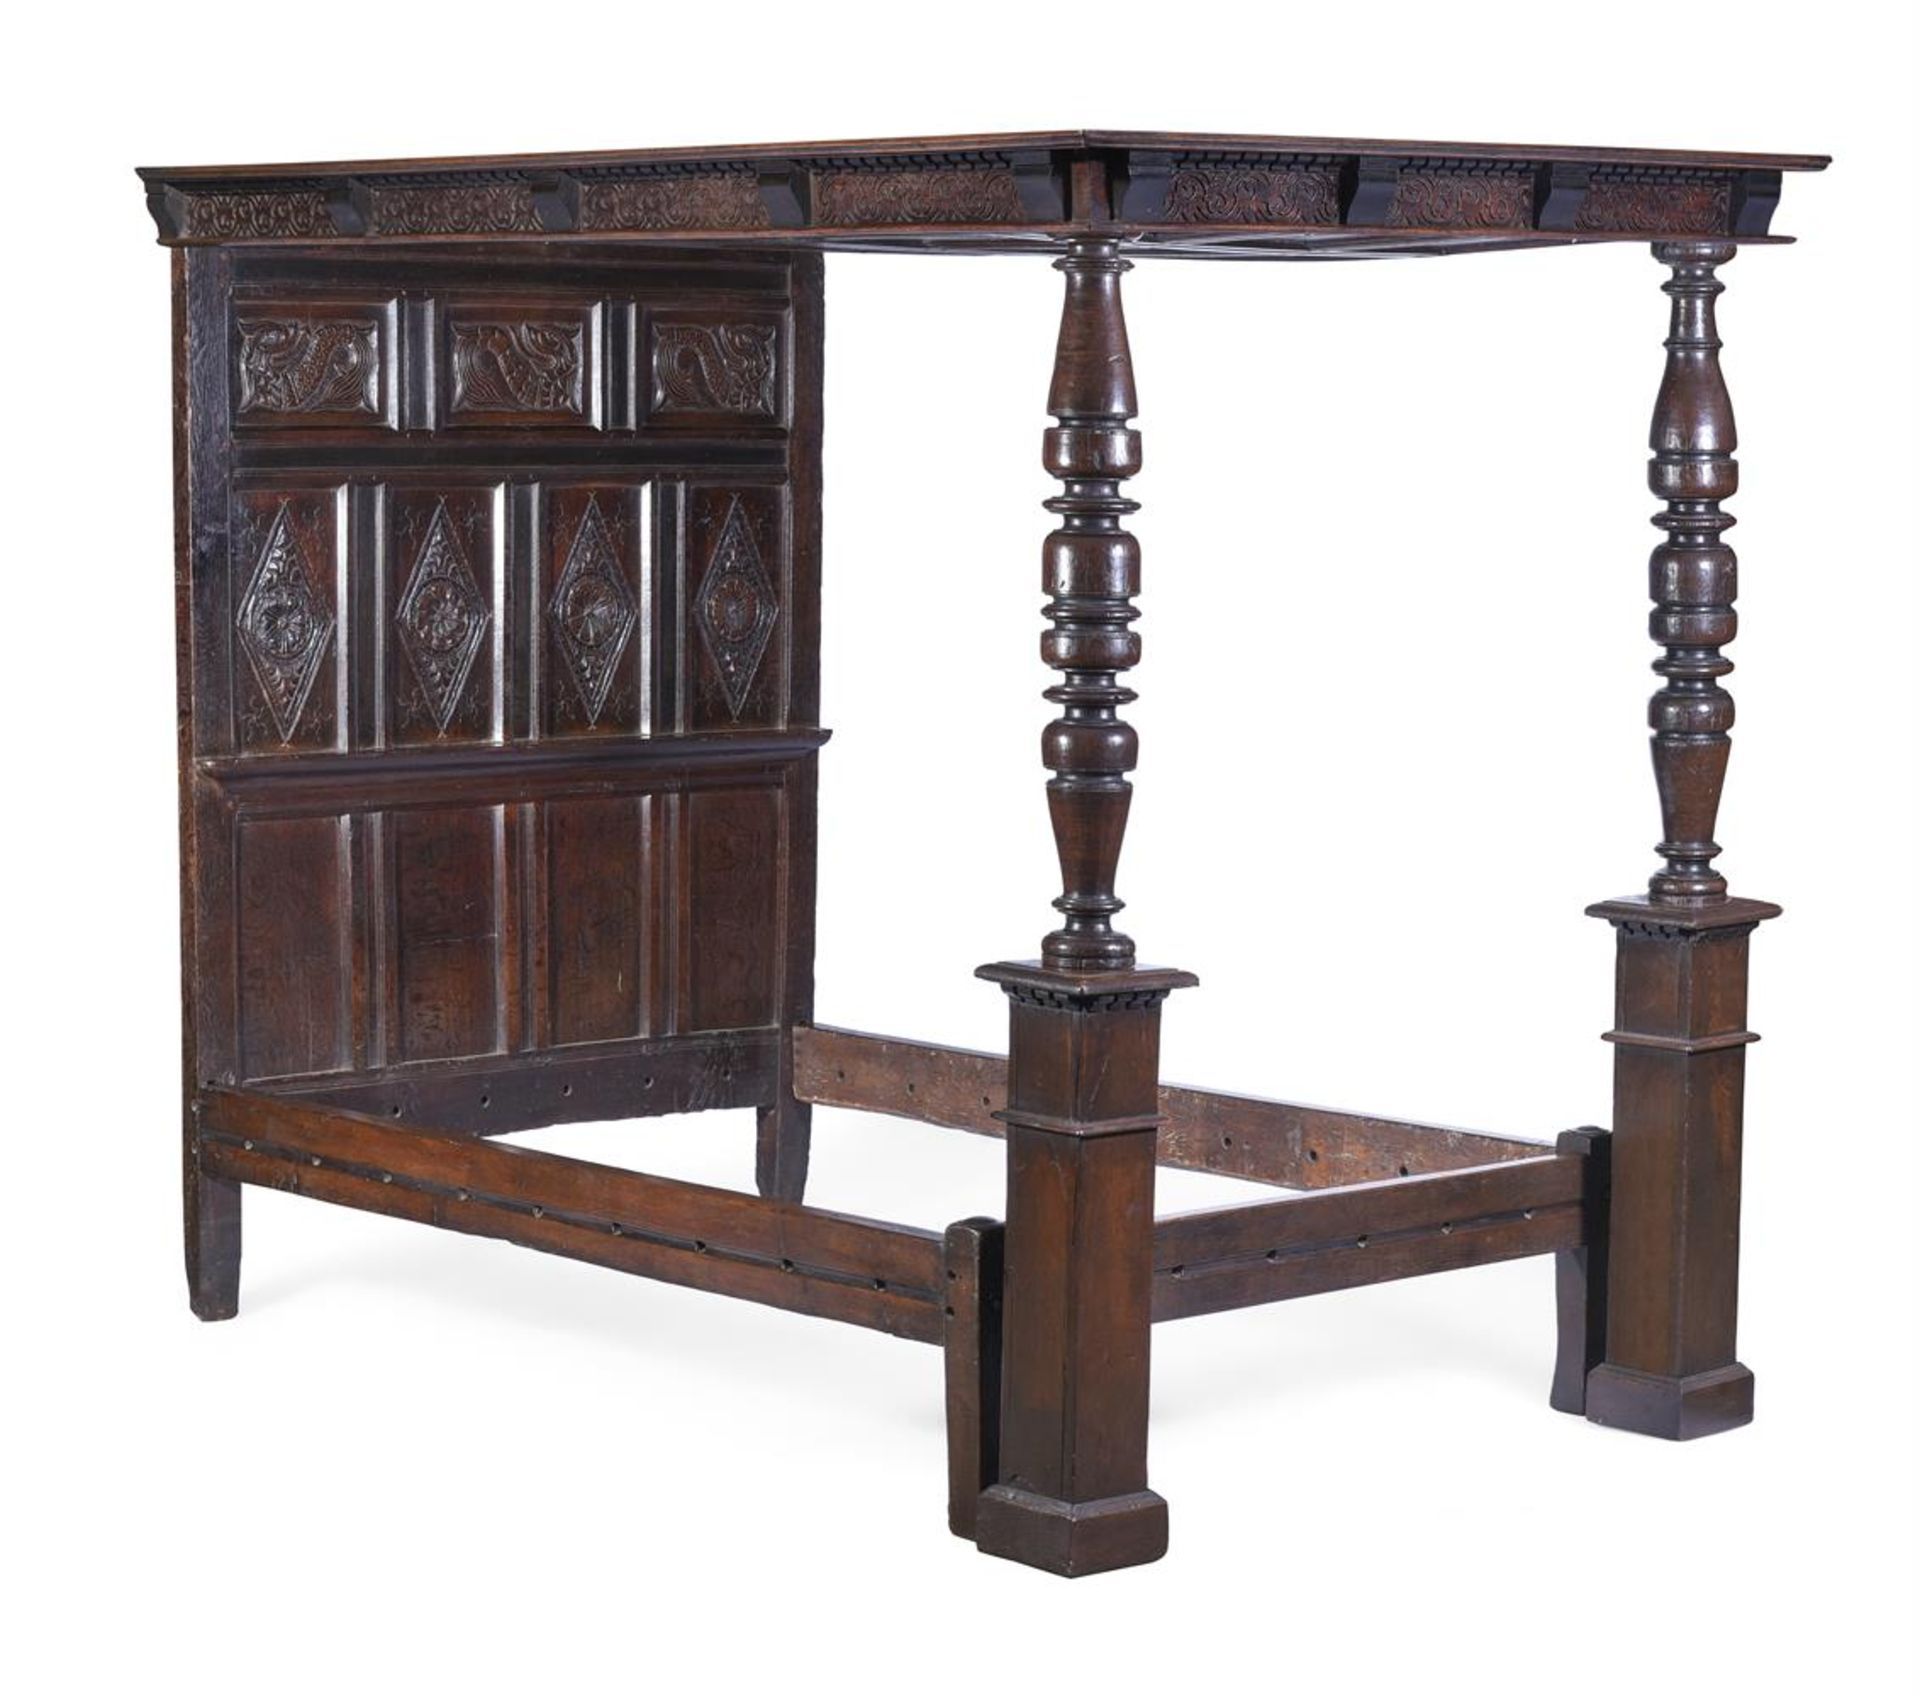 A CARVED OAK FOUR POST BED, 17TH CENTURY